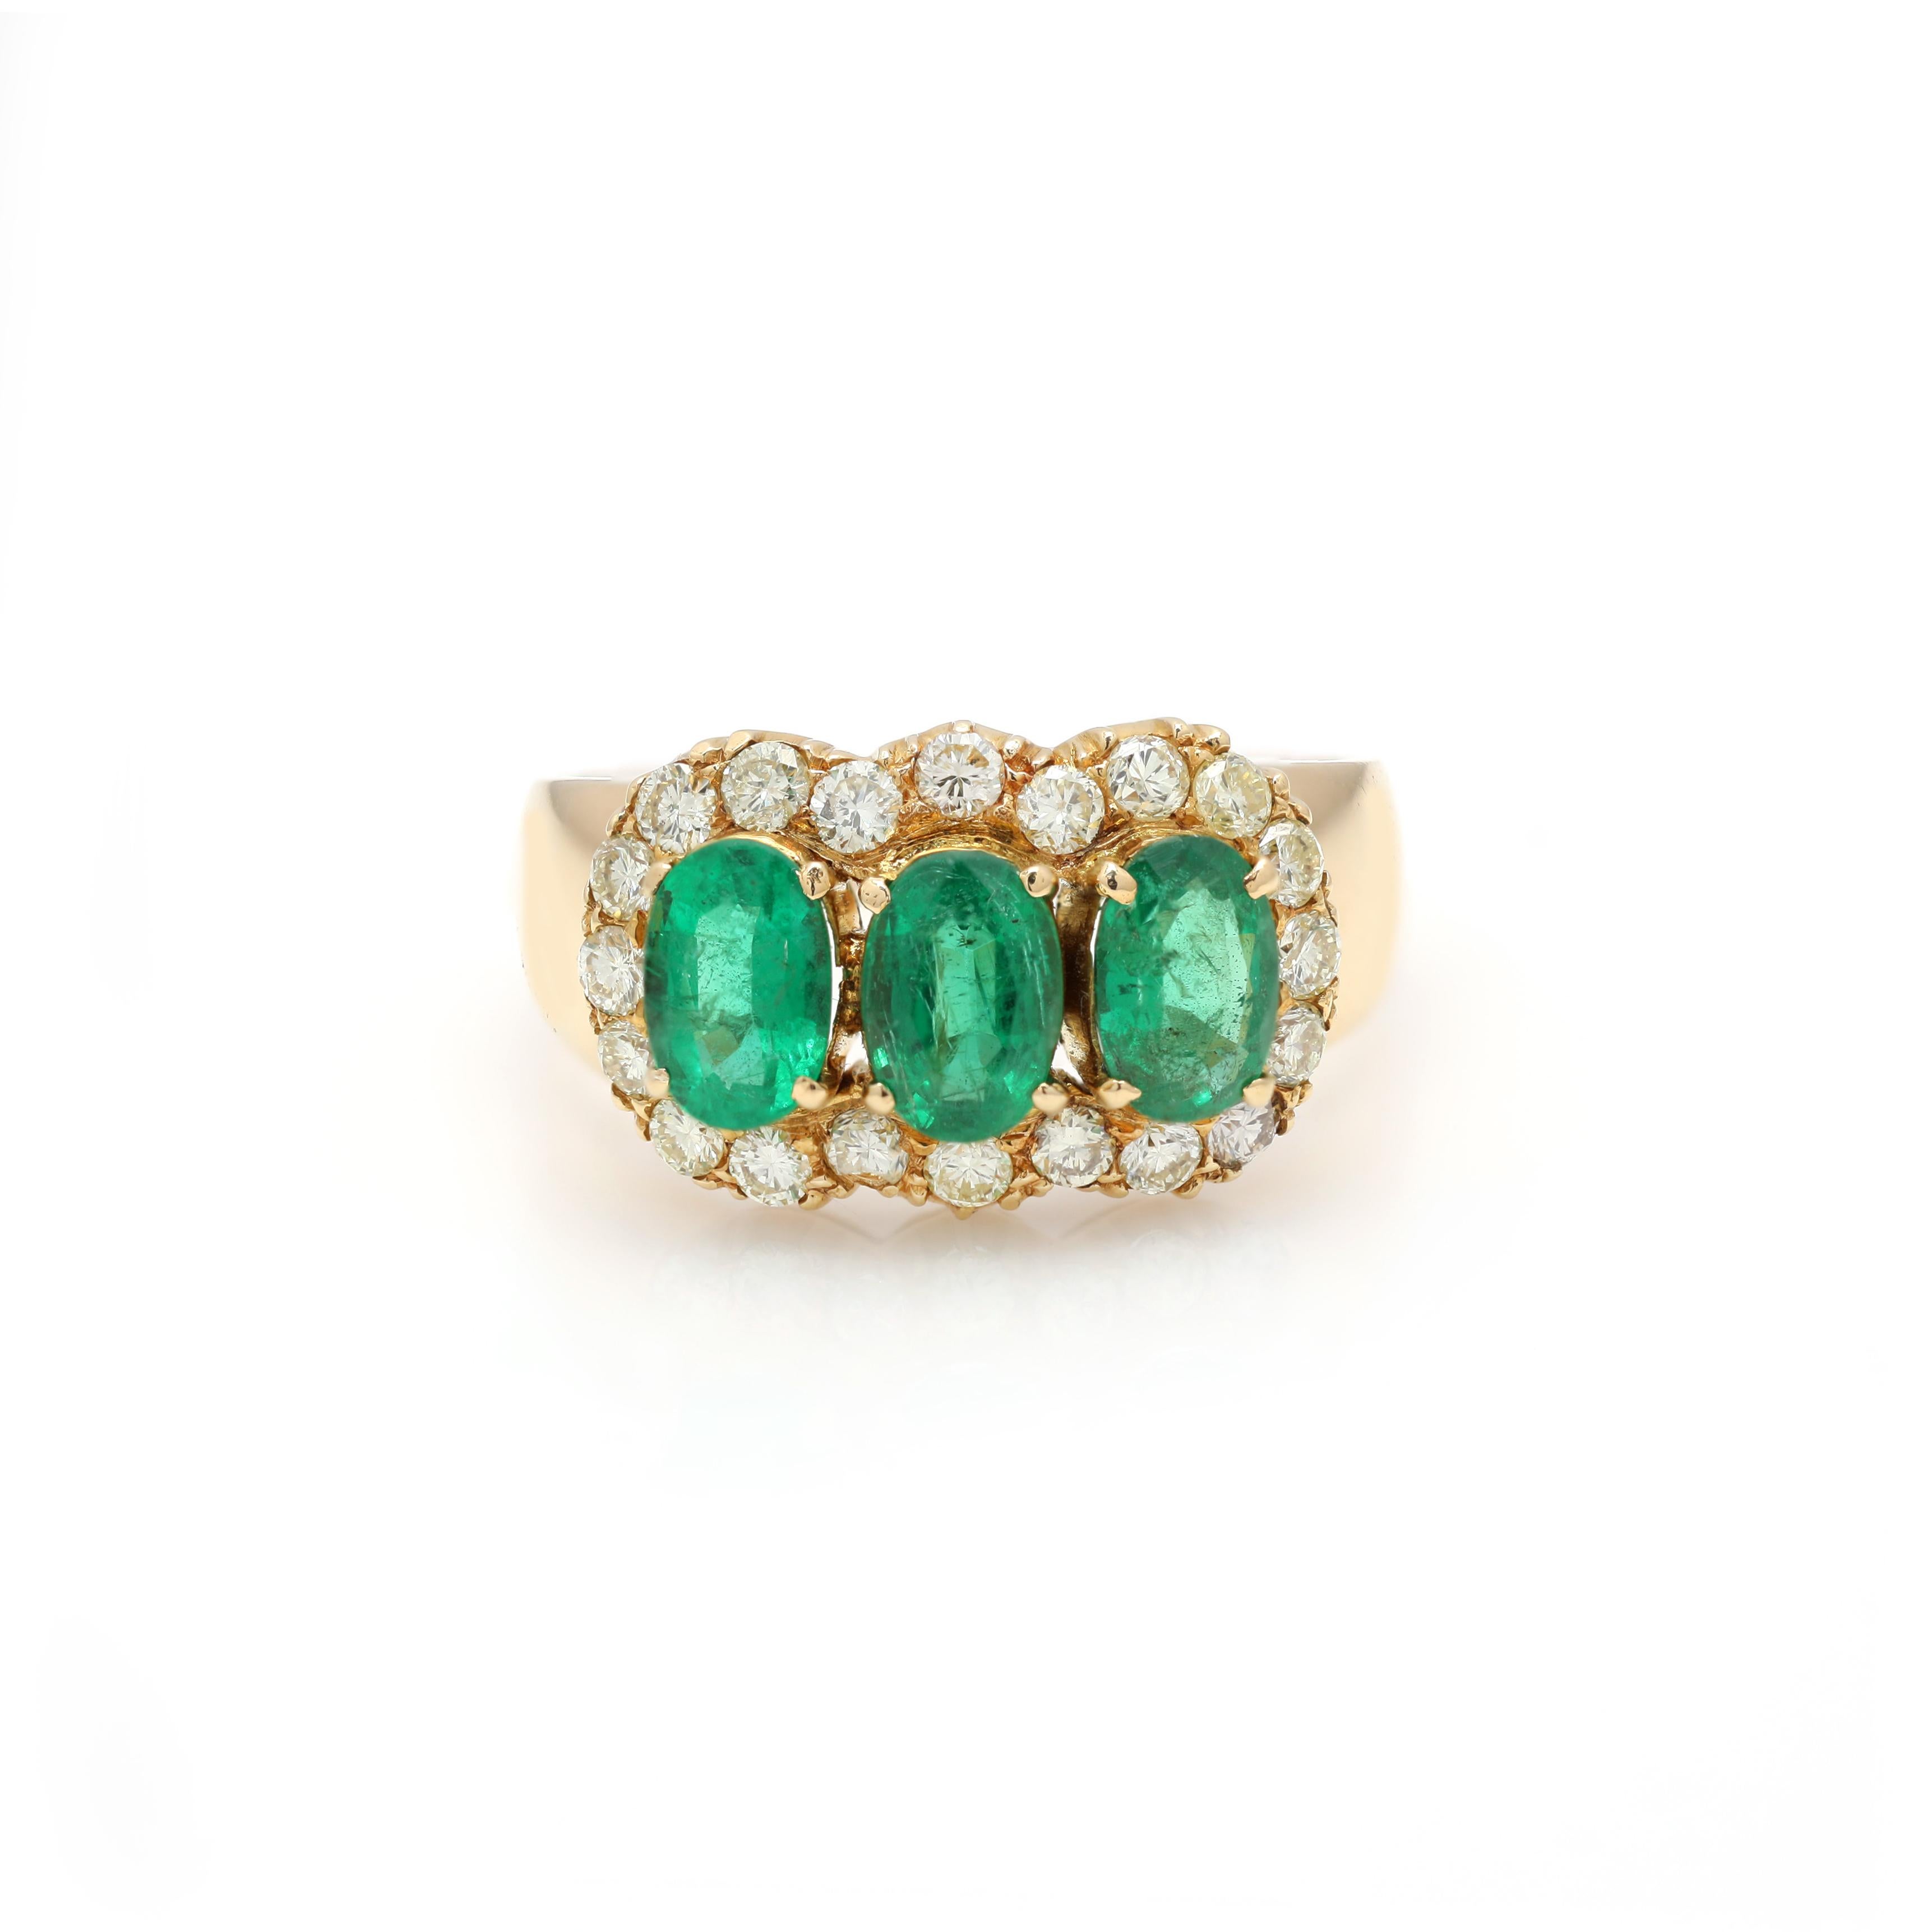 For Sale:  Estate 2.1 ct Oval Emerald Ring with Diamonds Encircling in 18 Karat Yellow Gold 3